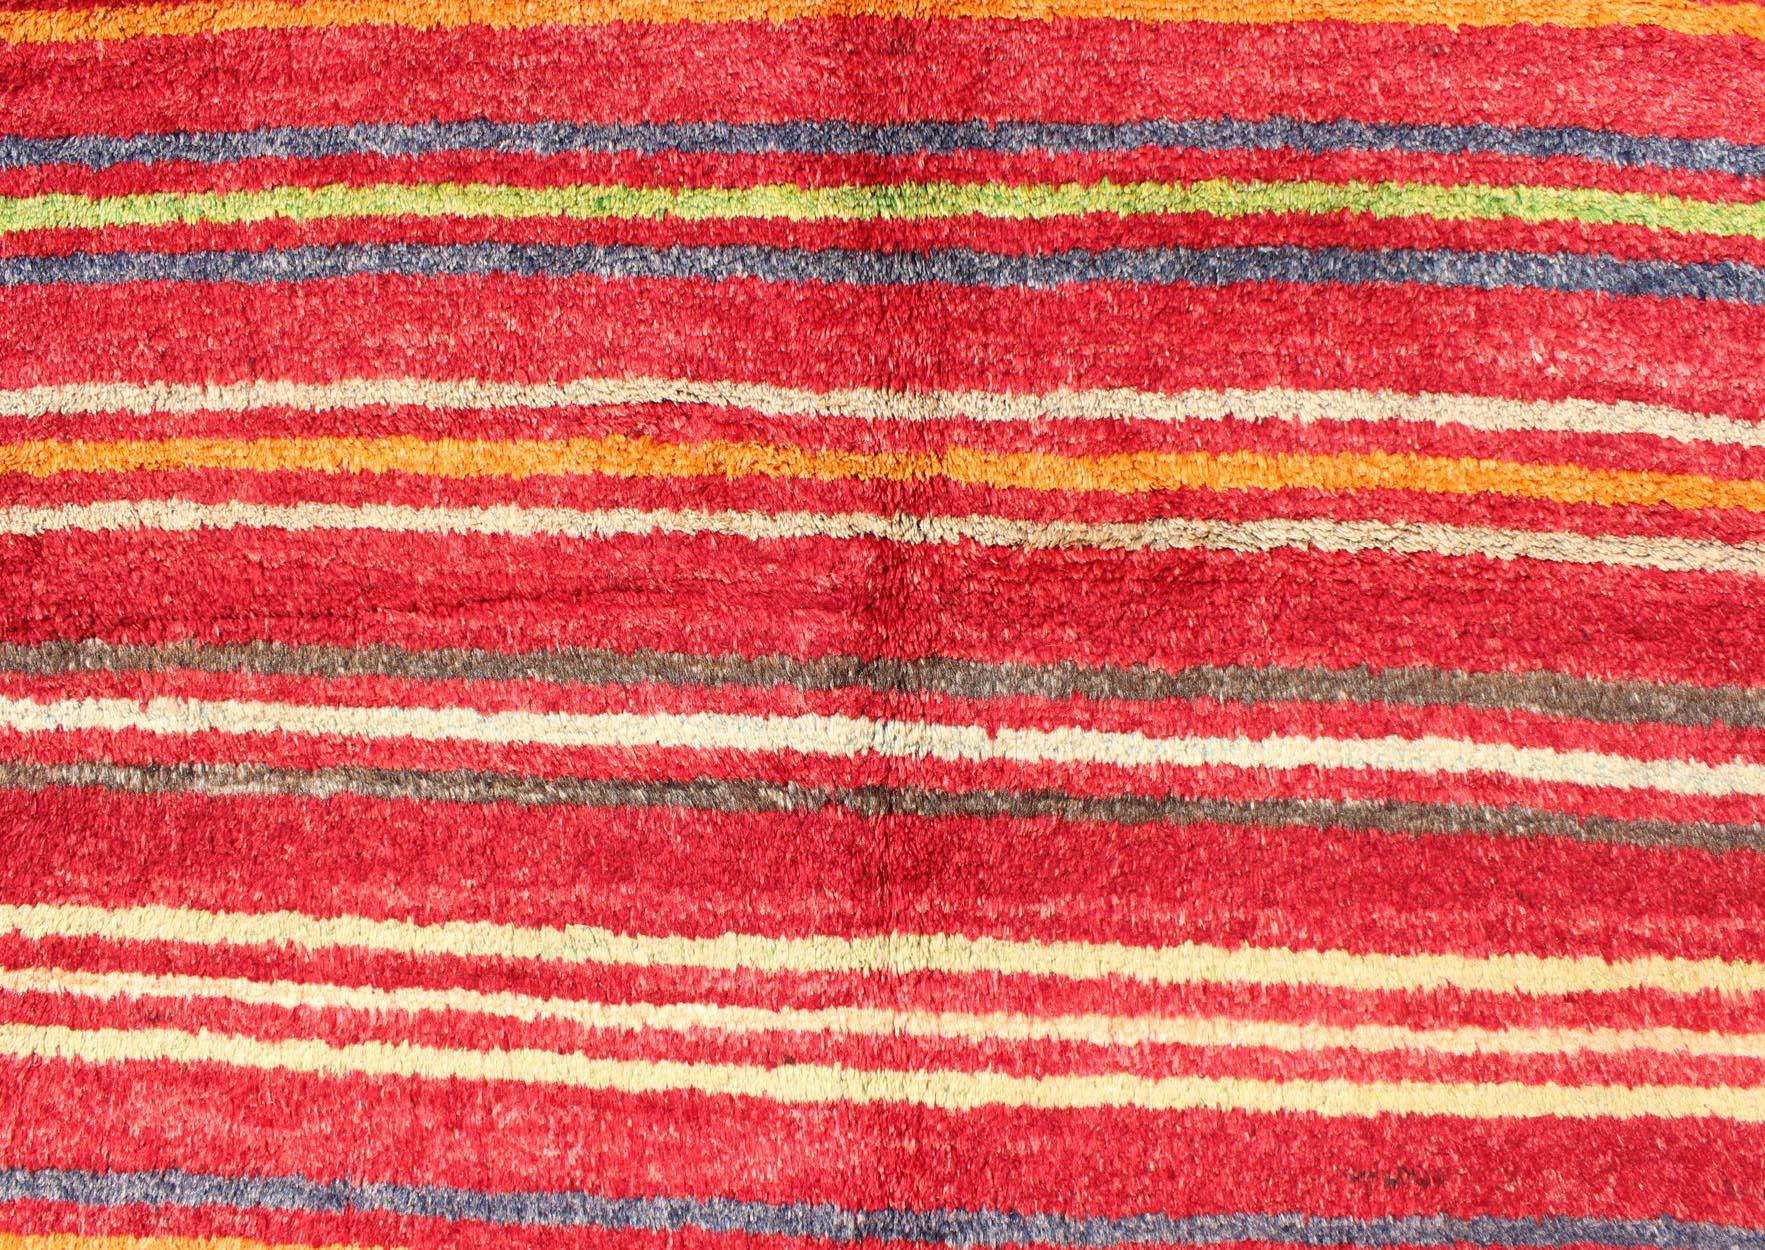 20th Century Turkish Tulu Carpet with Colorful Striped Pattern in Red, Orange, Blue, Green For Sale